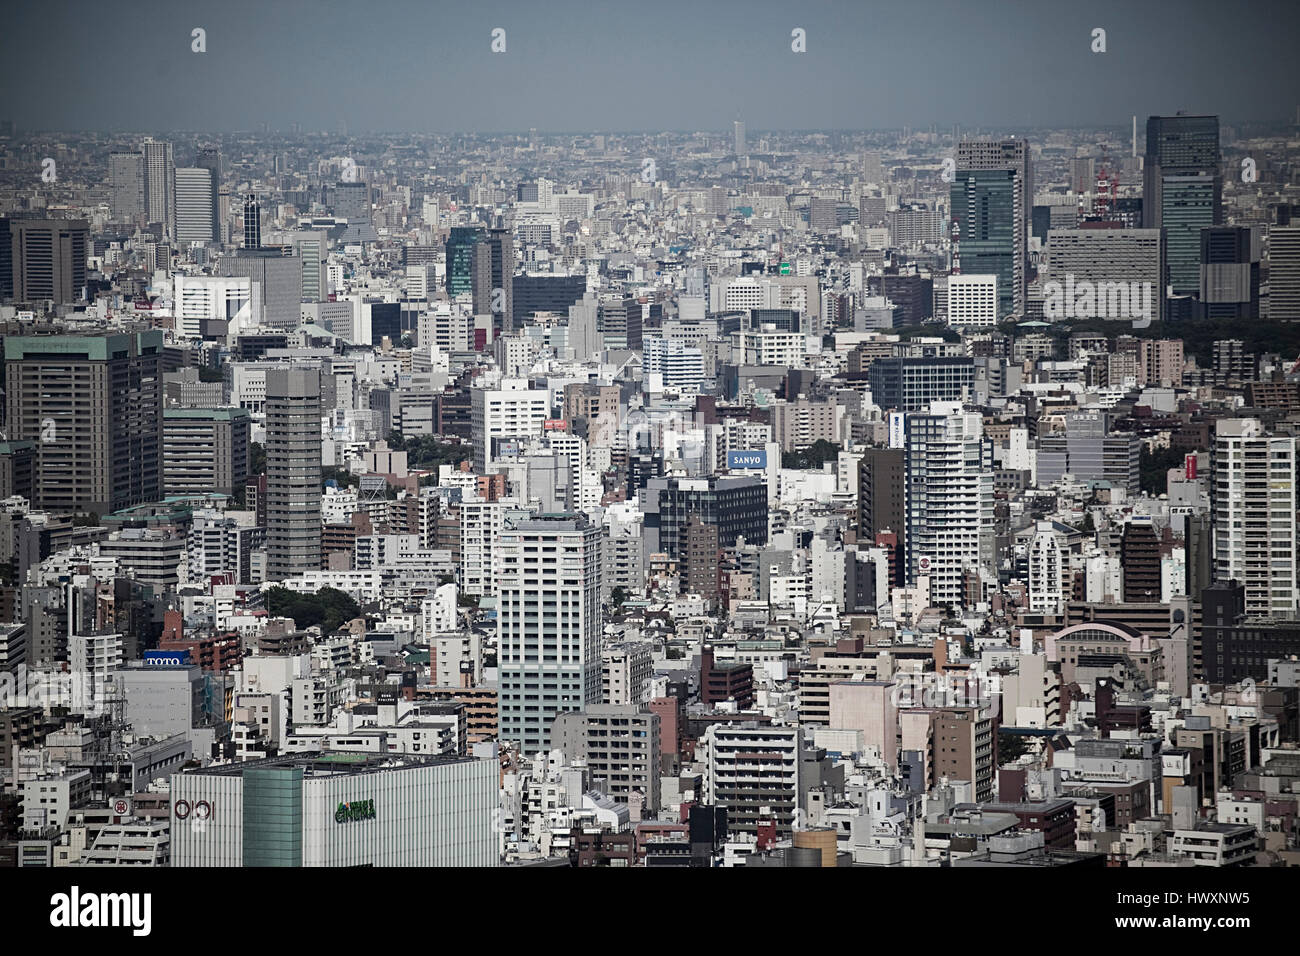 Tokyo, Japan - July 11, 2011. Cityscape of Tokyo, which is the capital and largest city in the country. Stock Photo